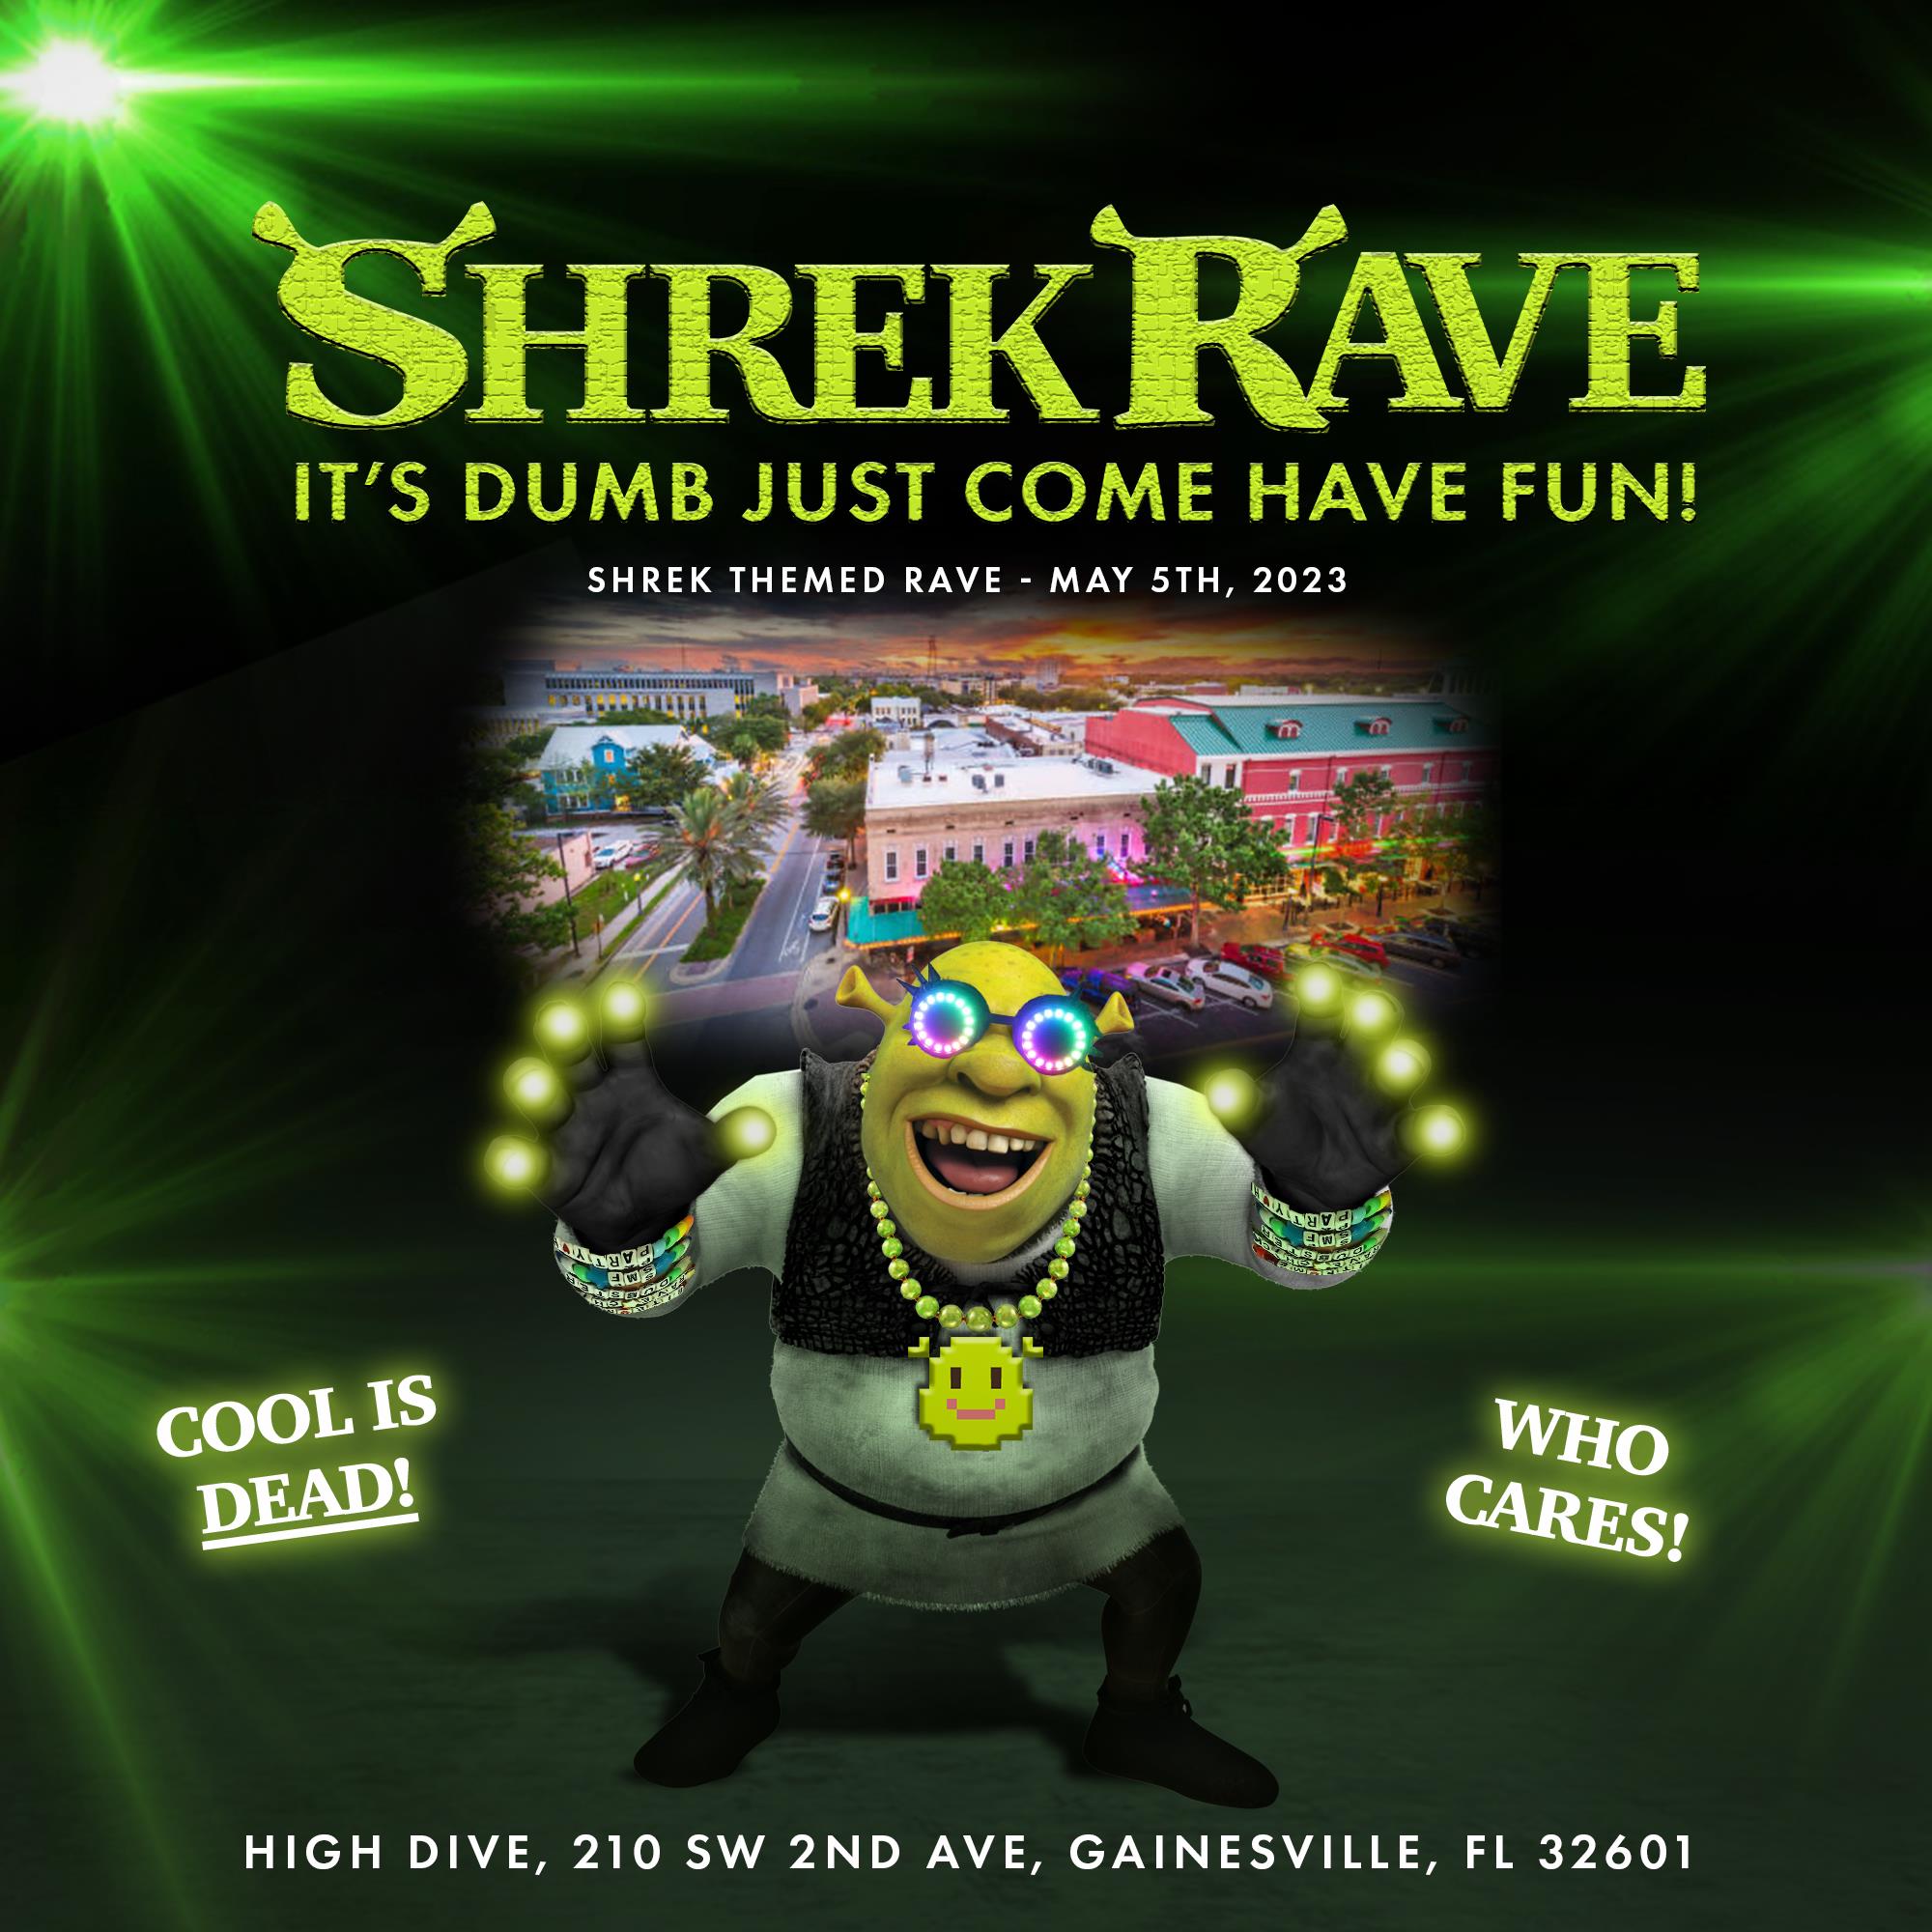 Buy Tickets to SHREK RAVE in Gainesville on May 05, 2023